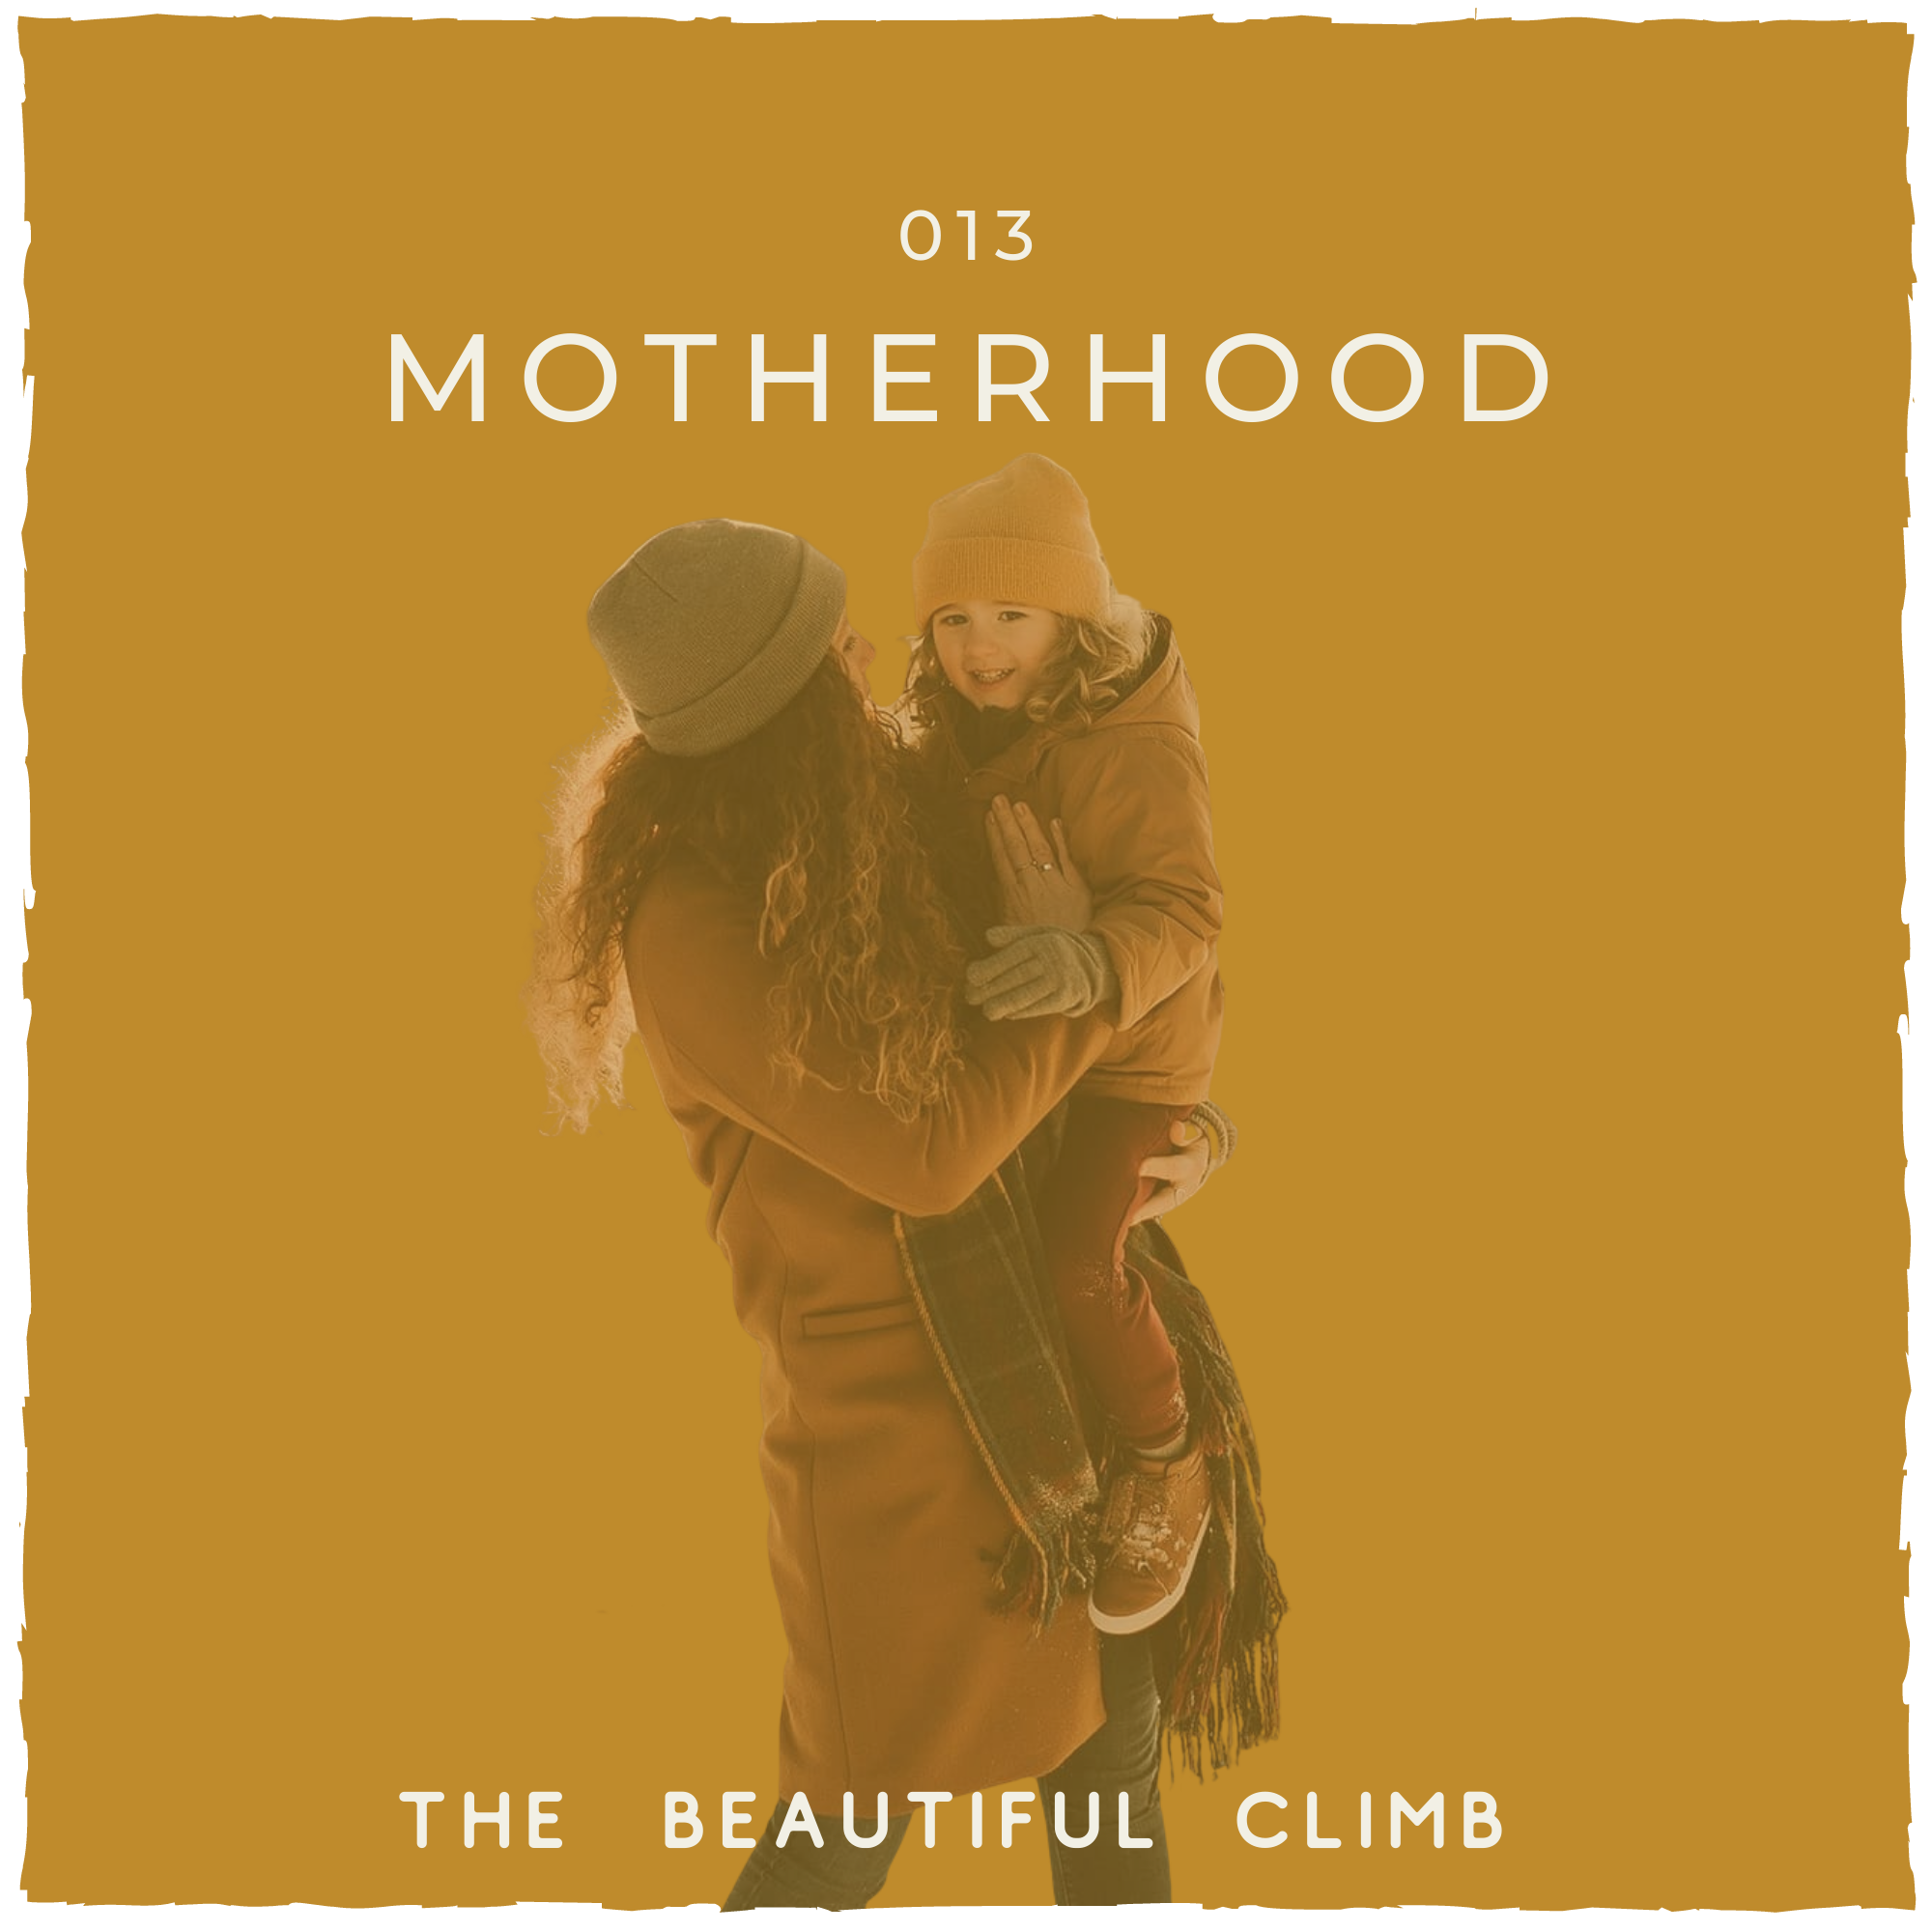 In Episode 13 of The Beautiful Climb Podcast, Finding Your Voice in Motherhood, Michelle Knight tells her story on finding her voice as a new mom and learning how to listen to her inner voice and communicate openly with her husband to make the best decisions for their family. She also shares how to look at past beliefs and stories around motherhood and choose to write your own definition of motherhood. #motherhood #personaldevelopment | Michelle Knight Co.